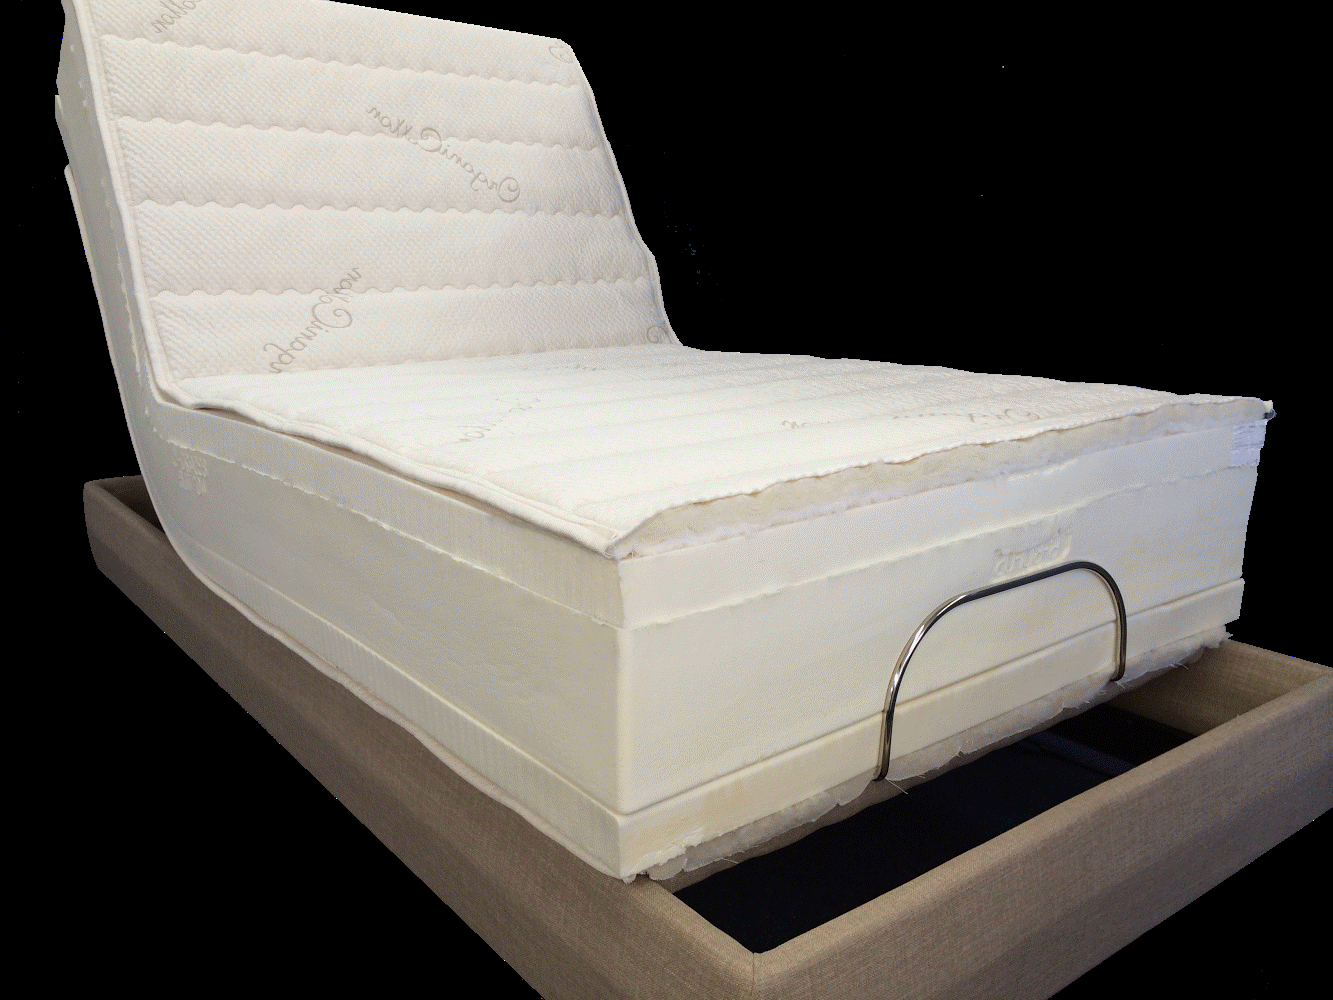 THE ULTIMATE in LA Escondido no toxin latex-pedic natural organic pure certified chemical free cotton and wool adjustable bed mattresses